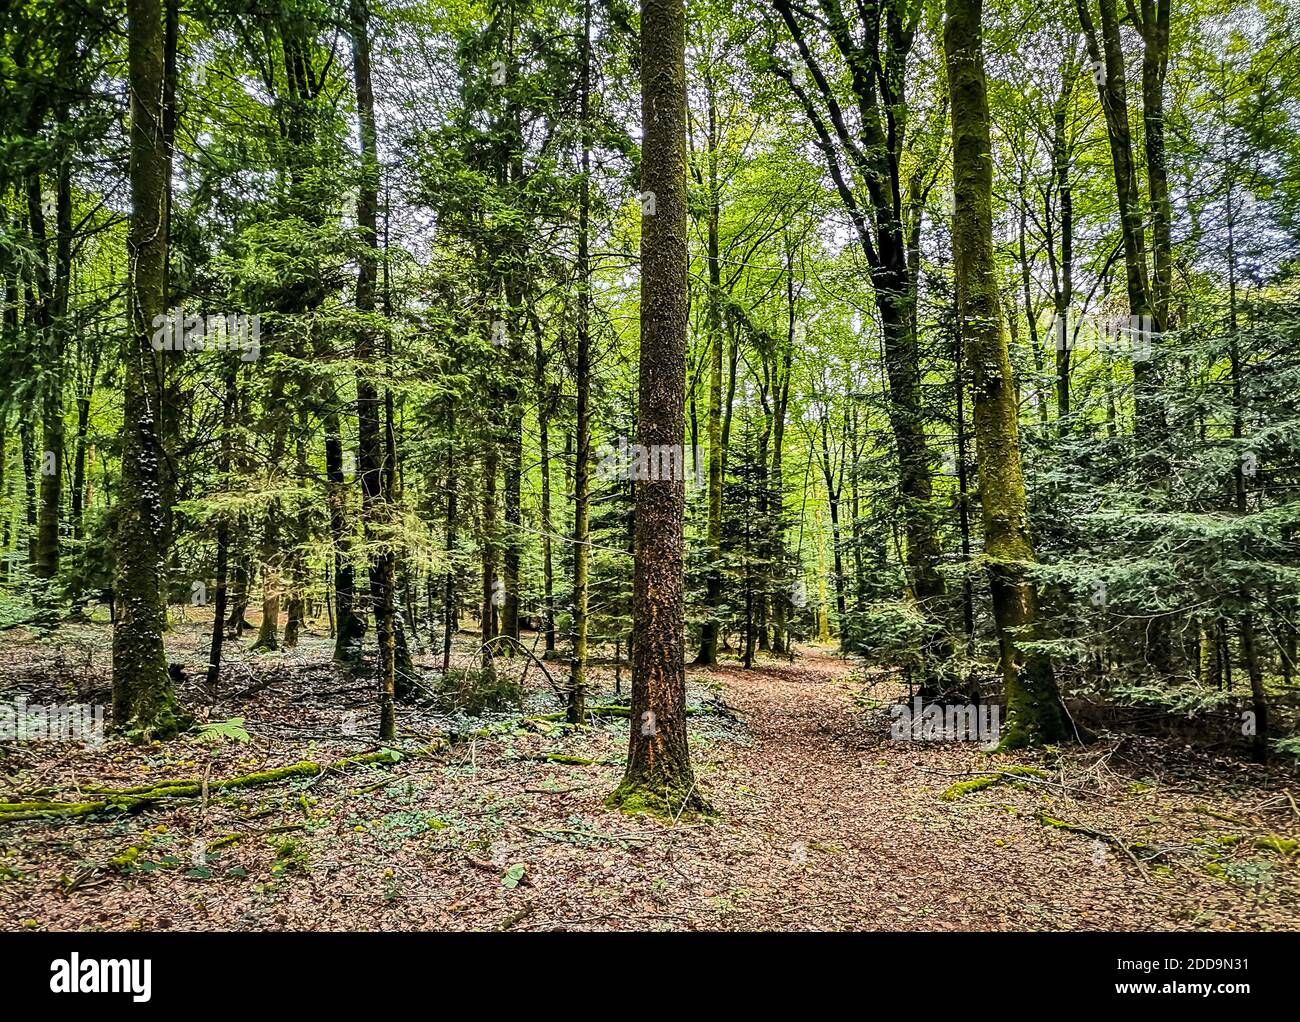 View within the dense population of trees in Fougères Forest cover with dead leaves on the ground, Brittany, France Stock Photo